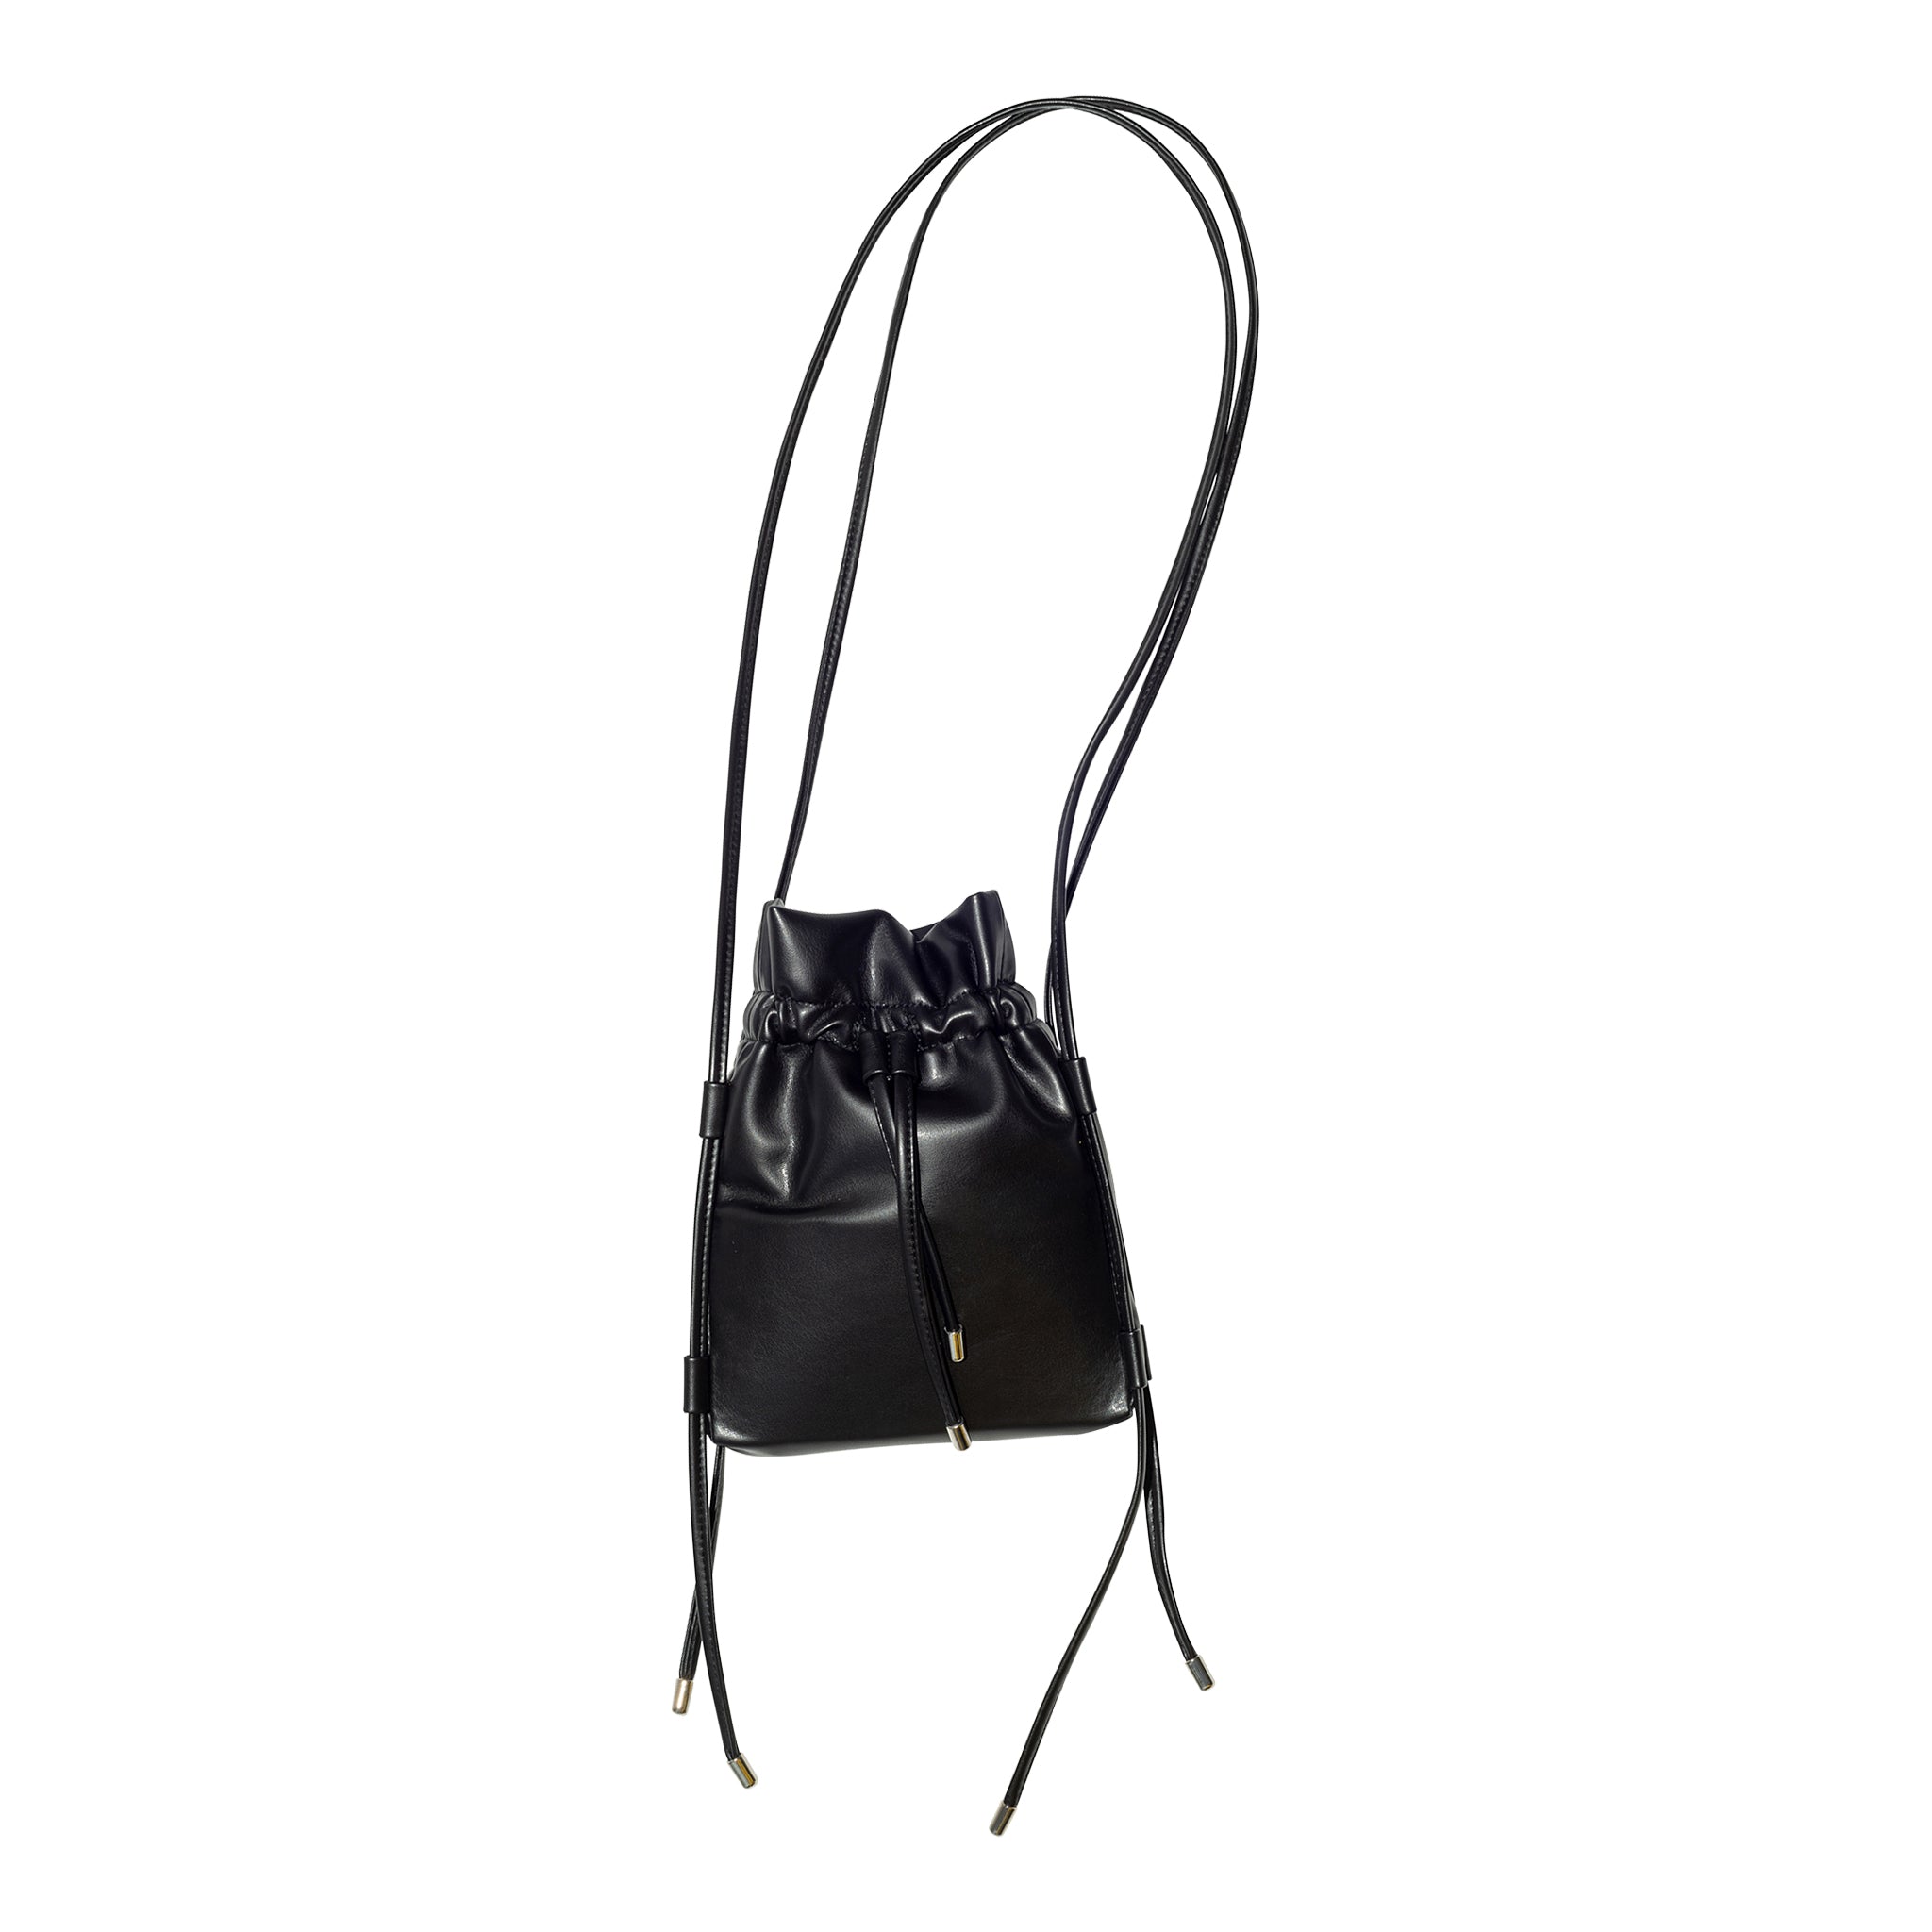 HOZEN Small Black Bag • Sling Pouch • Panther